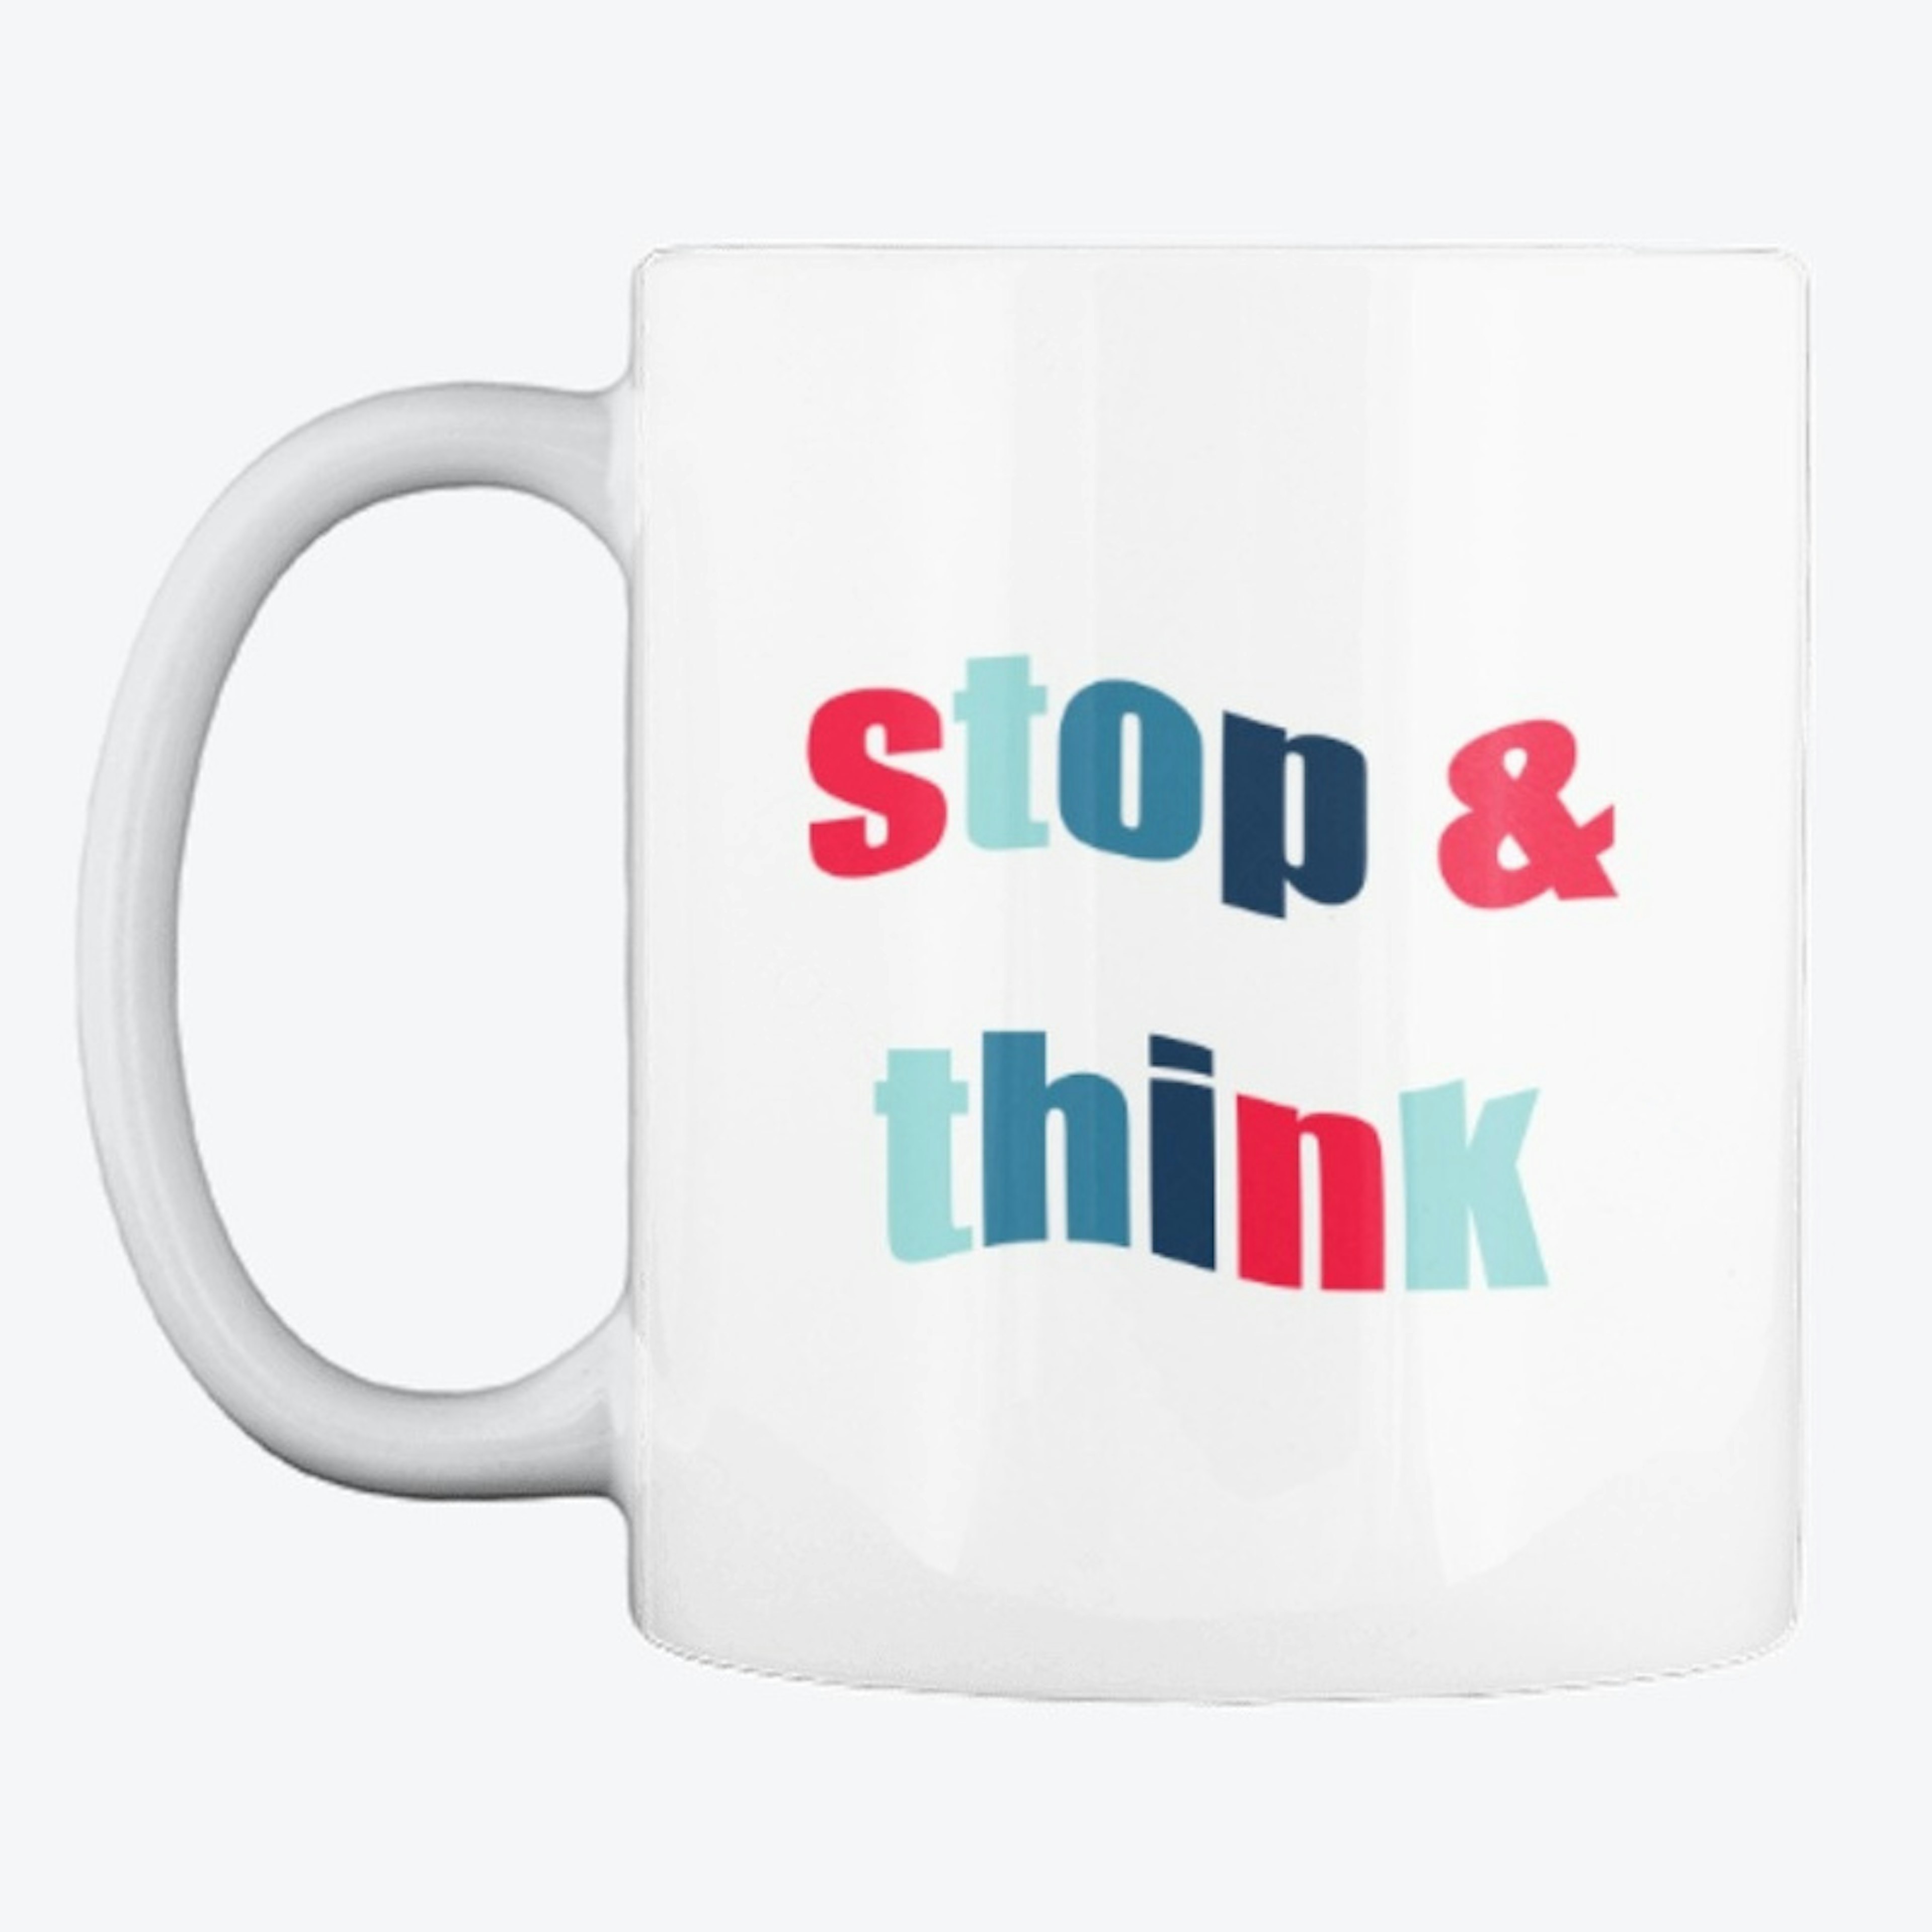 stop & think